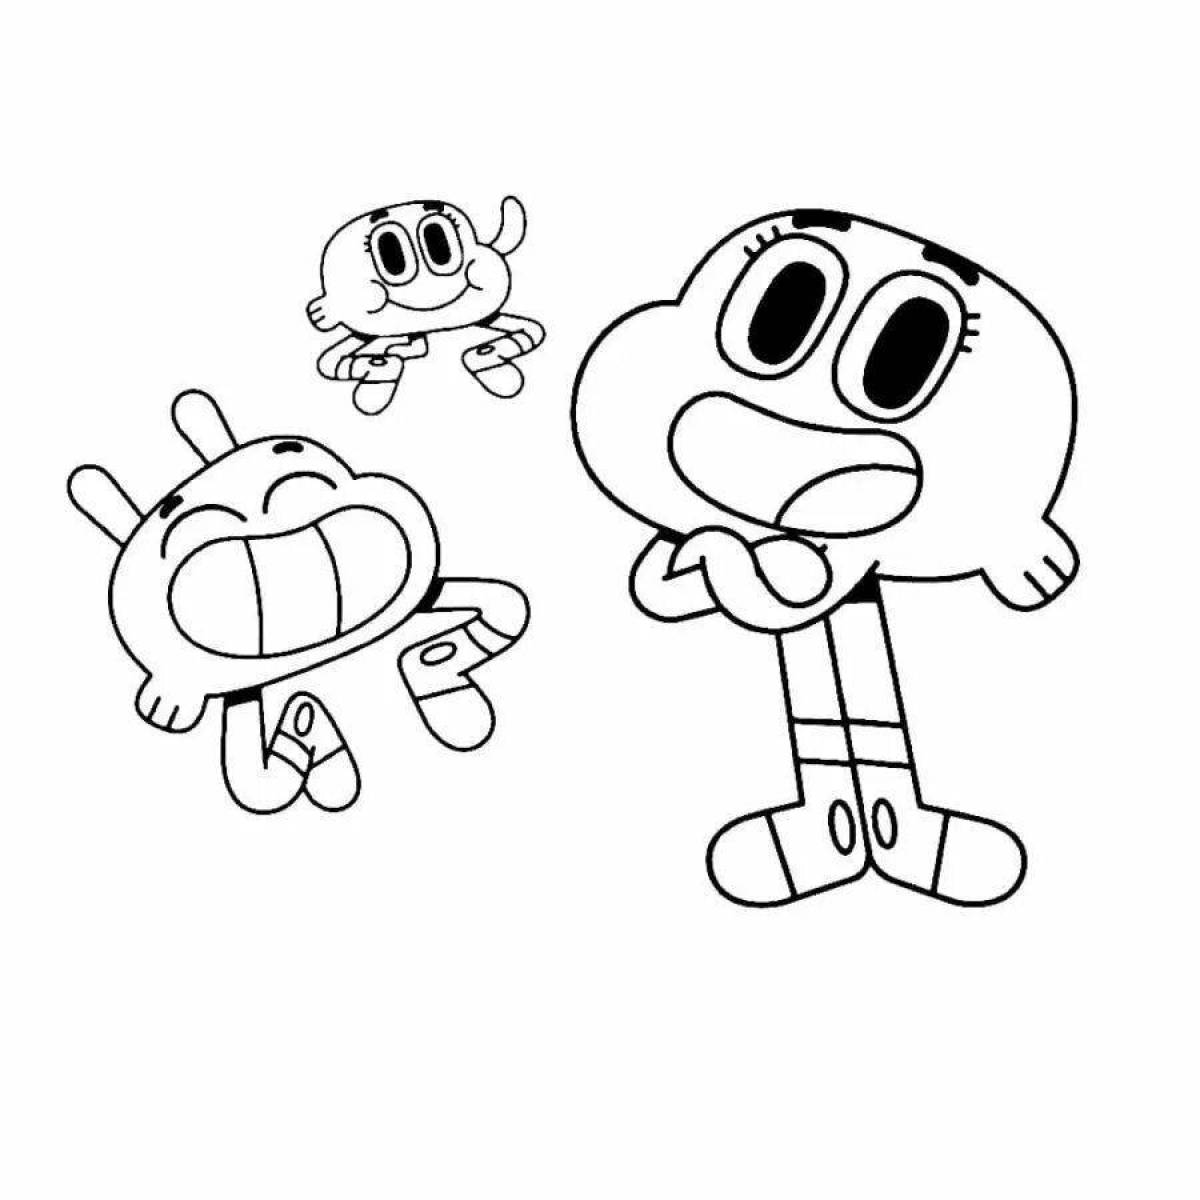 Dazzling gumball coloring page